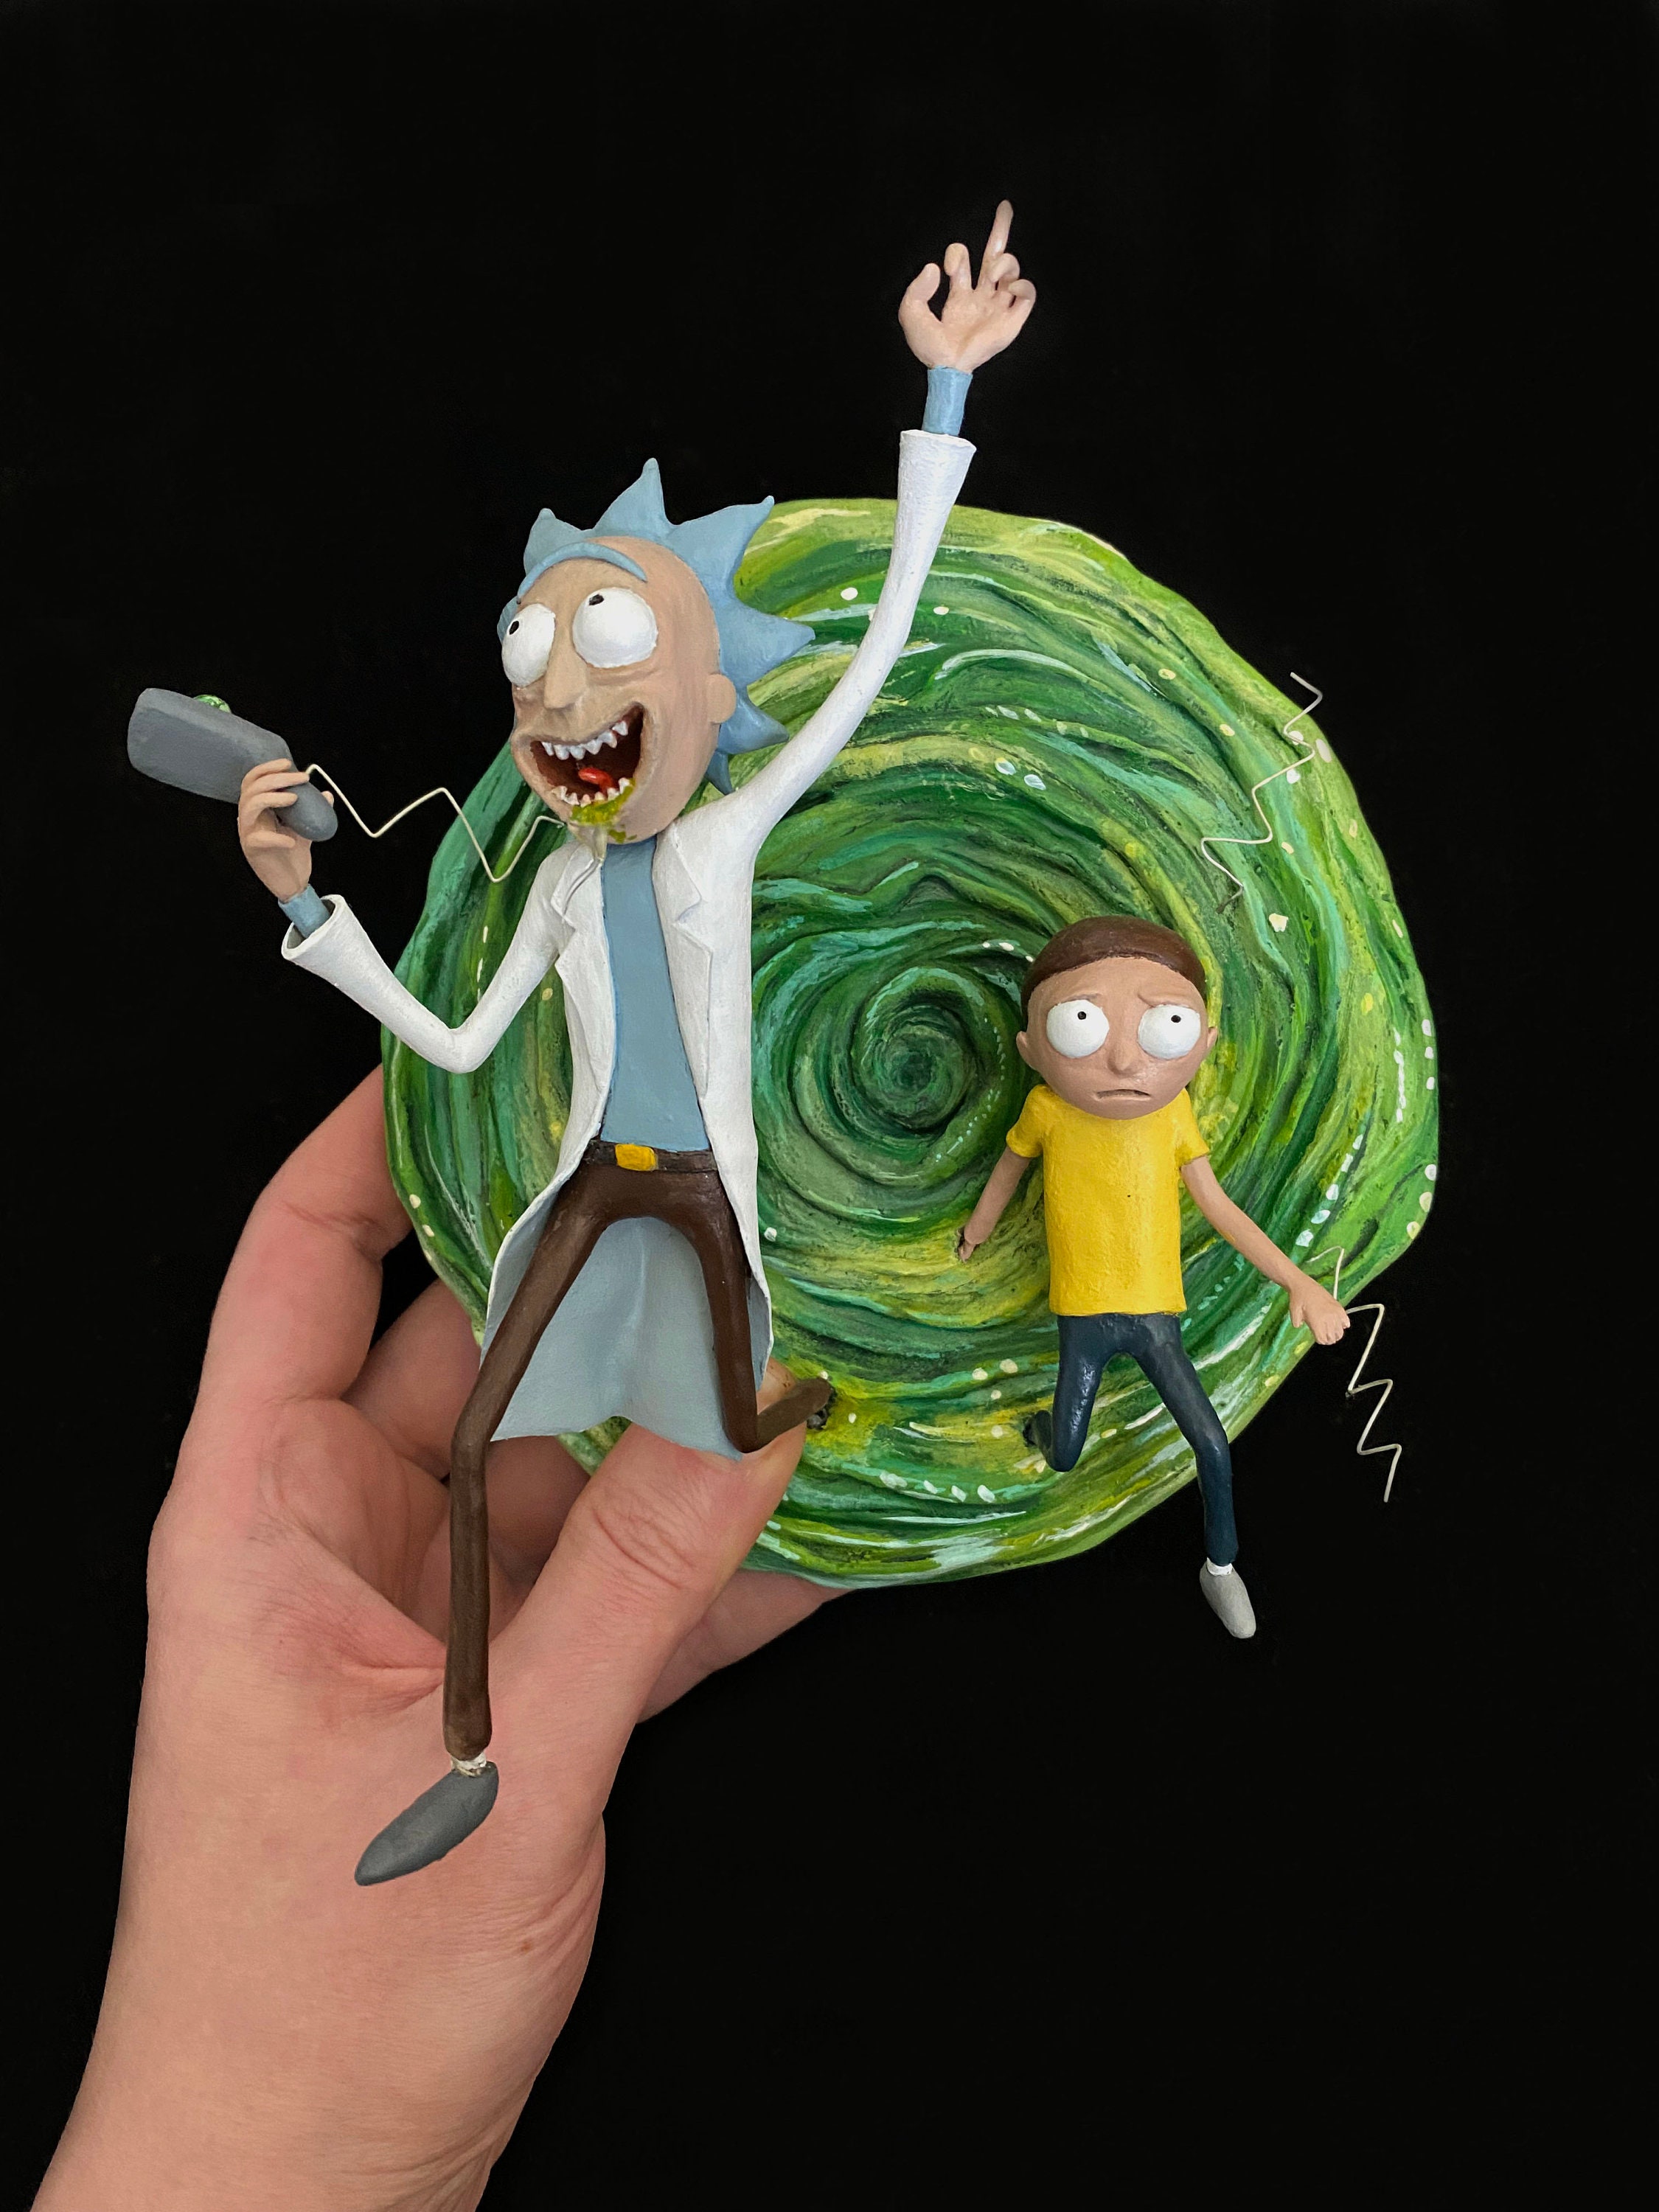 Rick and Morty Wall Hanger Cartoony Characters Handsculpted